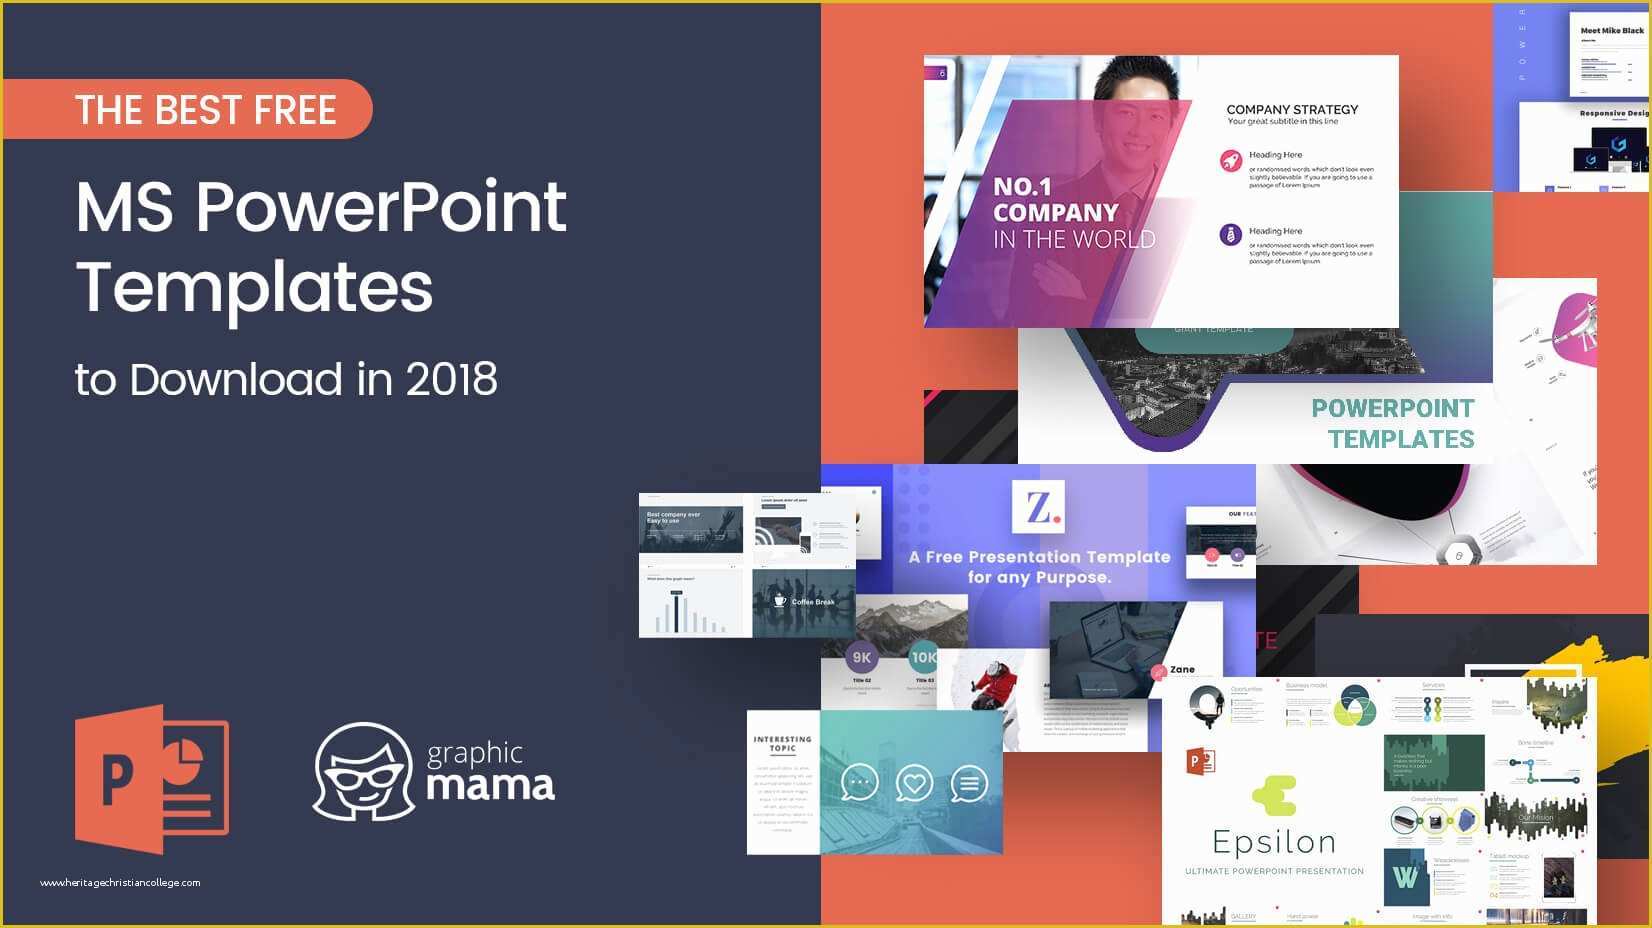 Creative Powerpoint Templates Free Download Of the Best Free Powerpoint Templates to Download In 2018